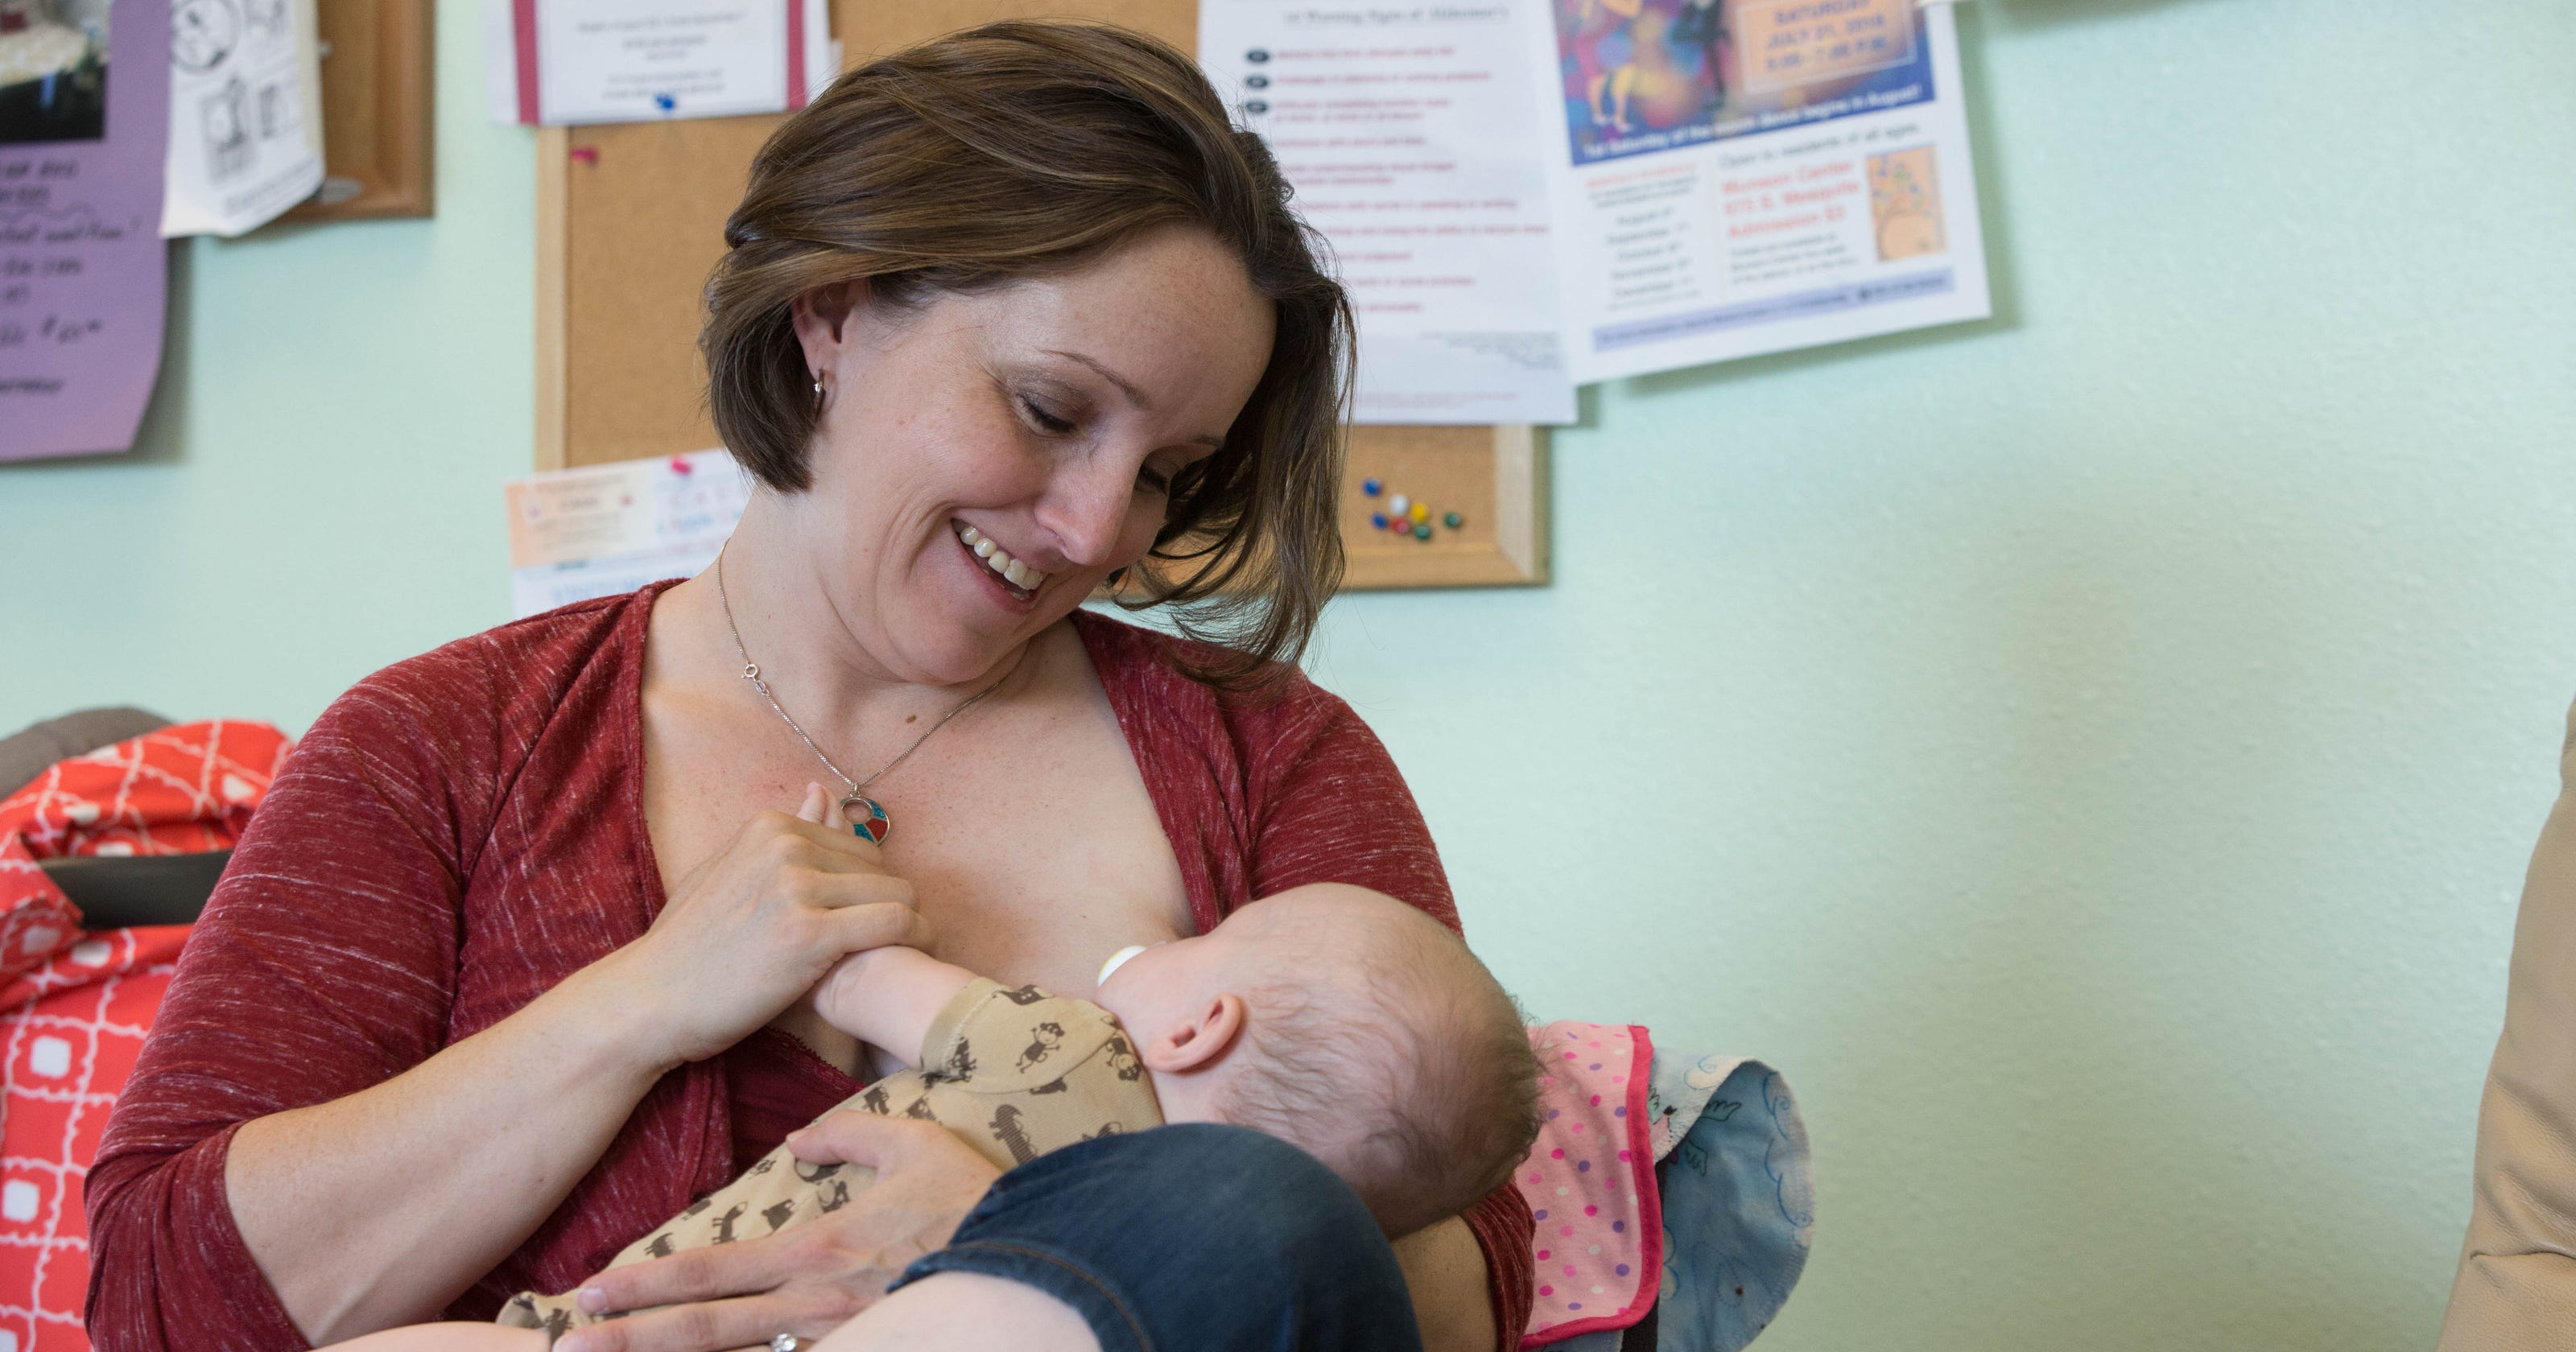 Breastfeeding Support Groups Aim To Help Las Cruces Mothers 